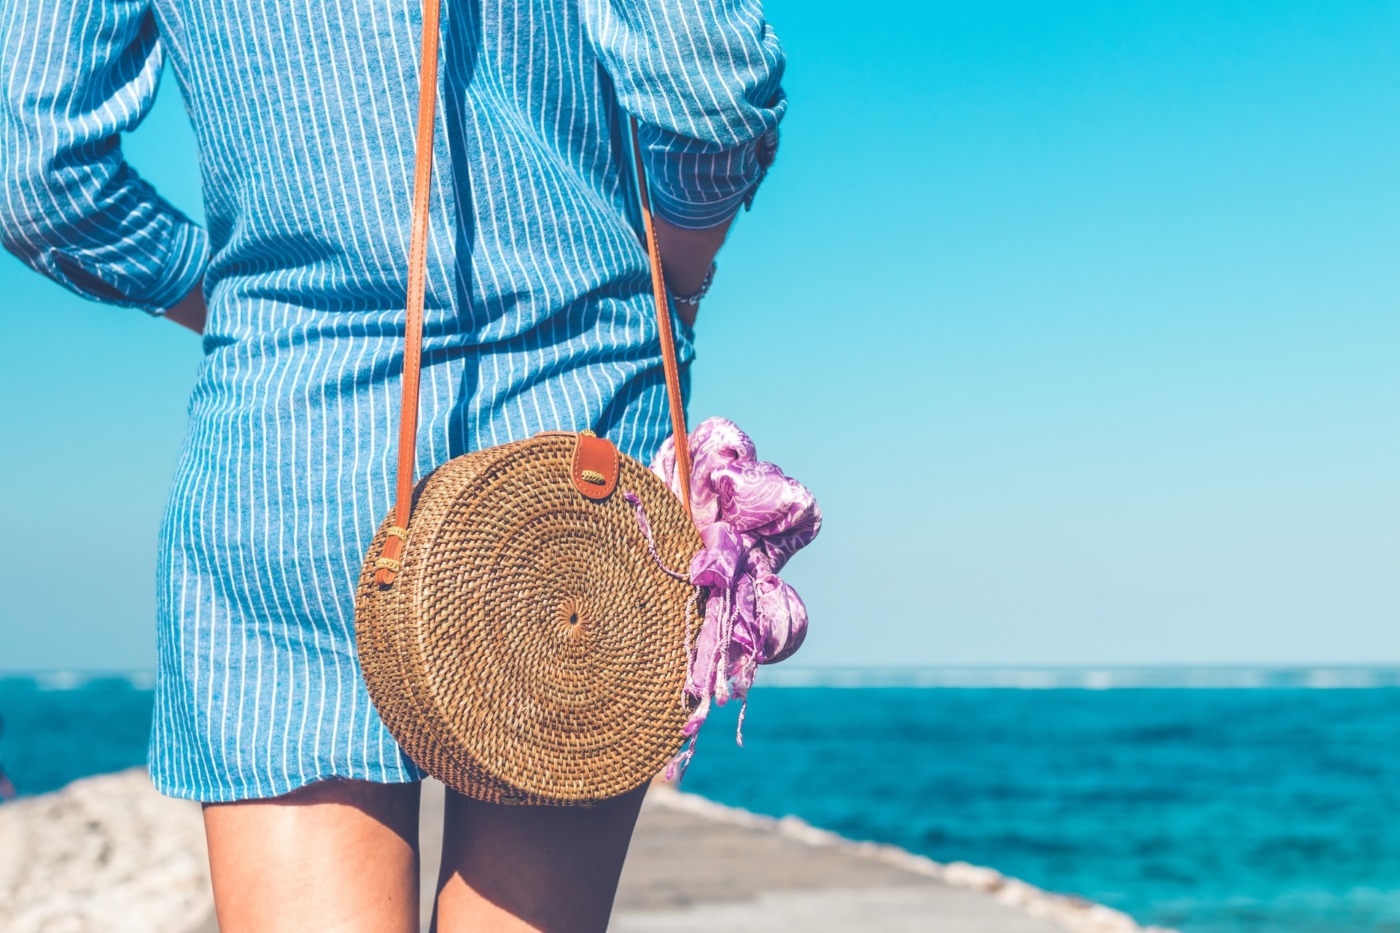 person walking by the sea with a bag and shirt dress